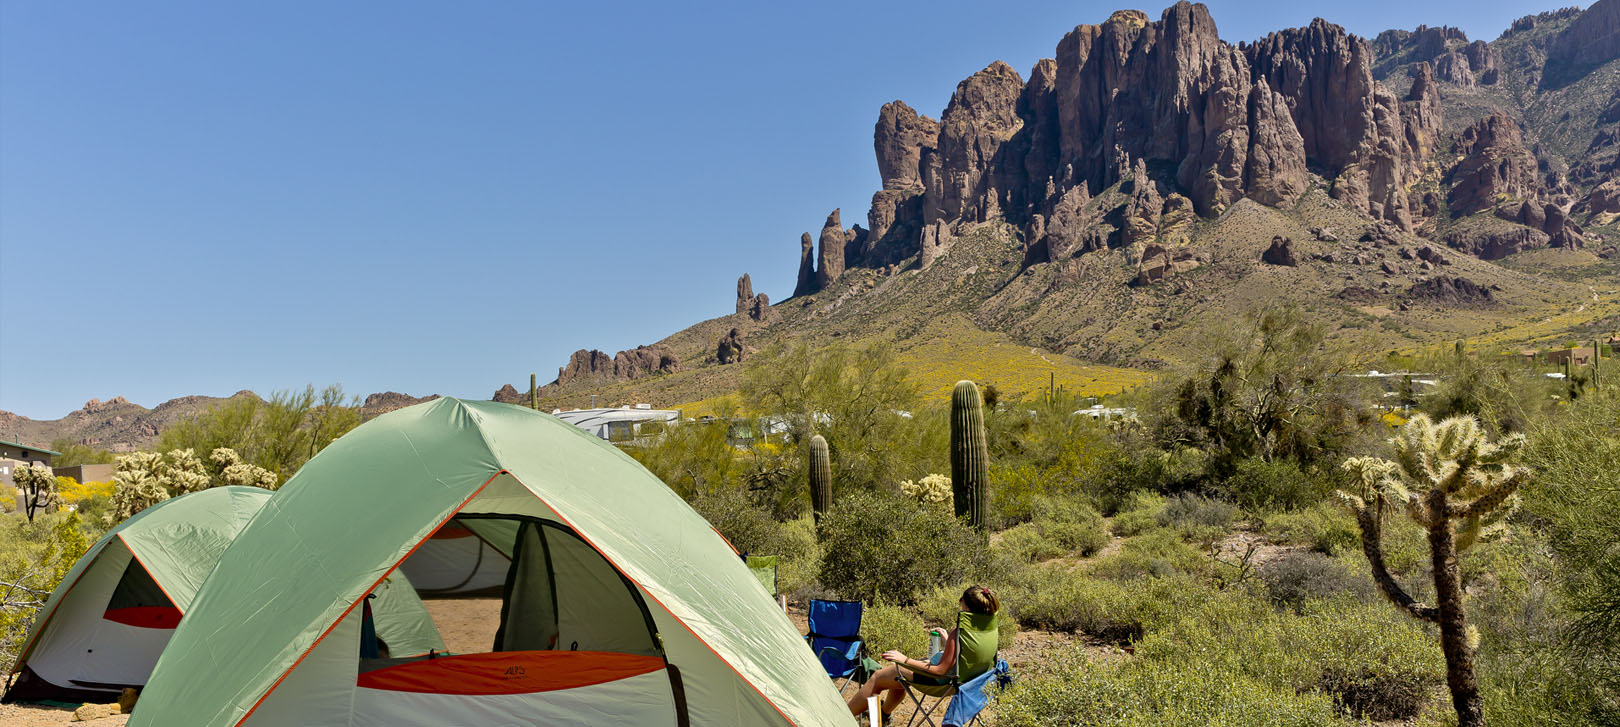 Tent camping at the base of the Superstition Mountains